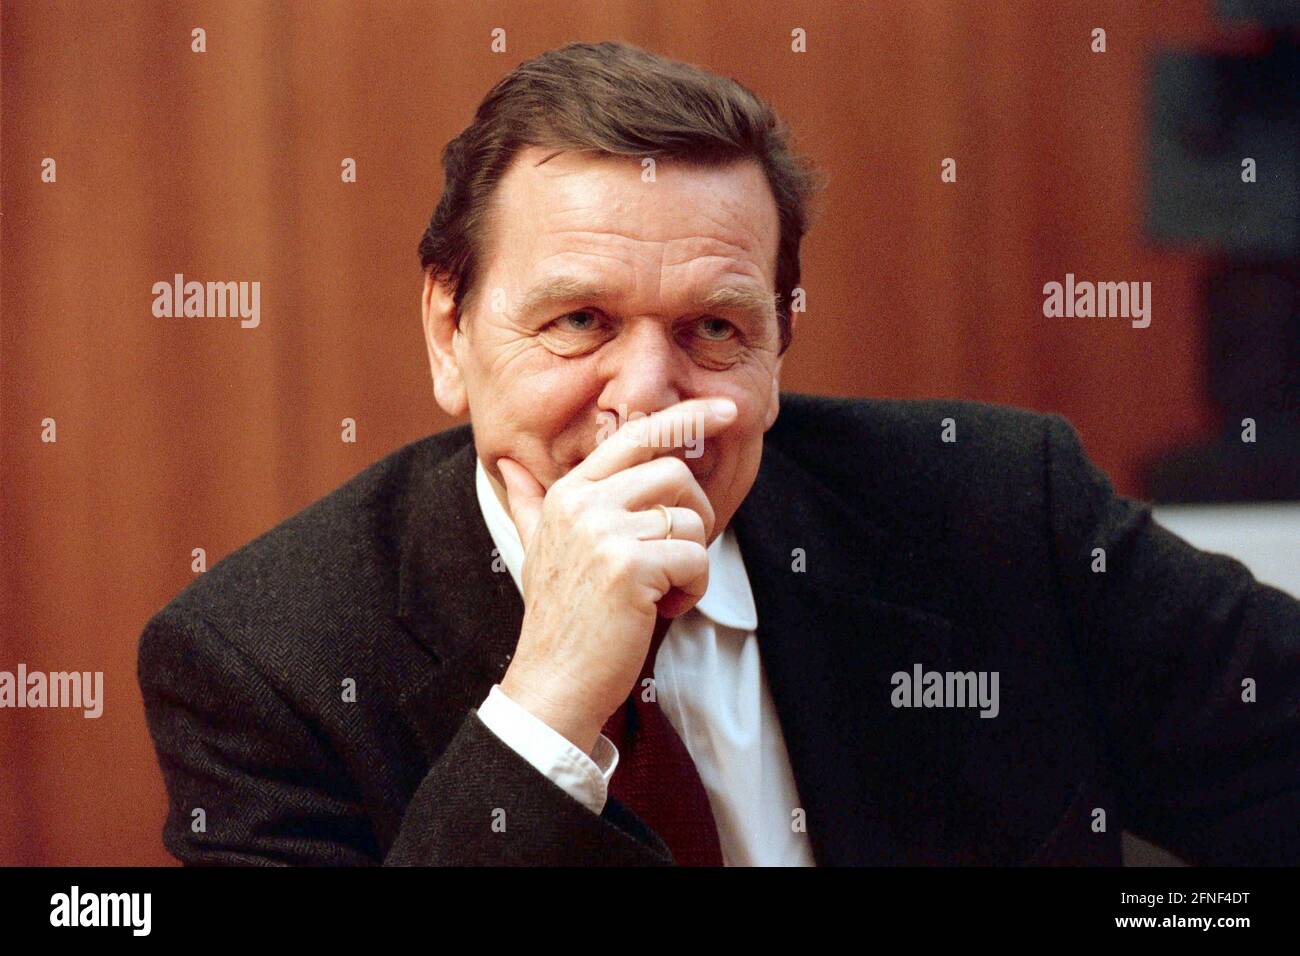 Chancellor Gerhard Schröder (SPD) during an interview in his office. [automated translation] Stock Photo